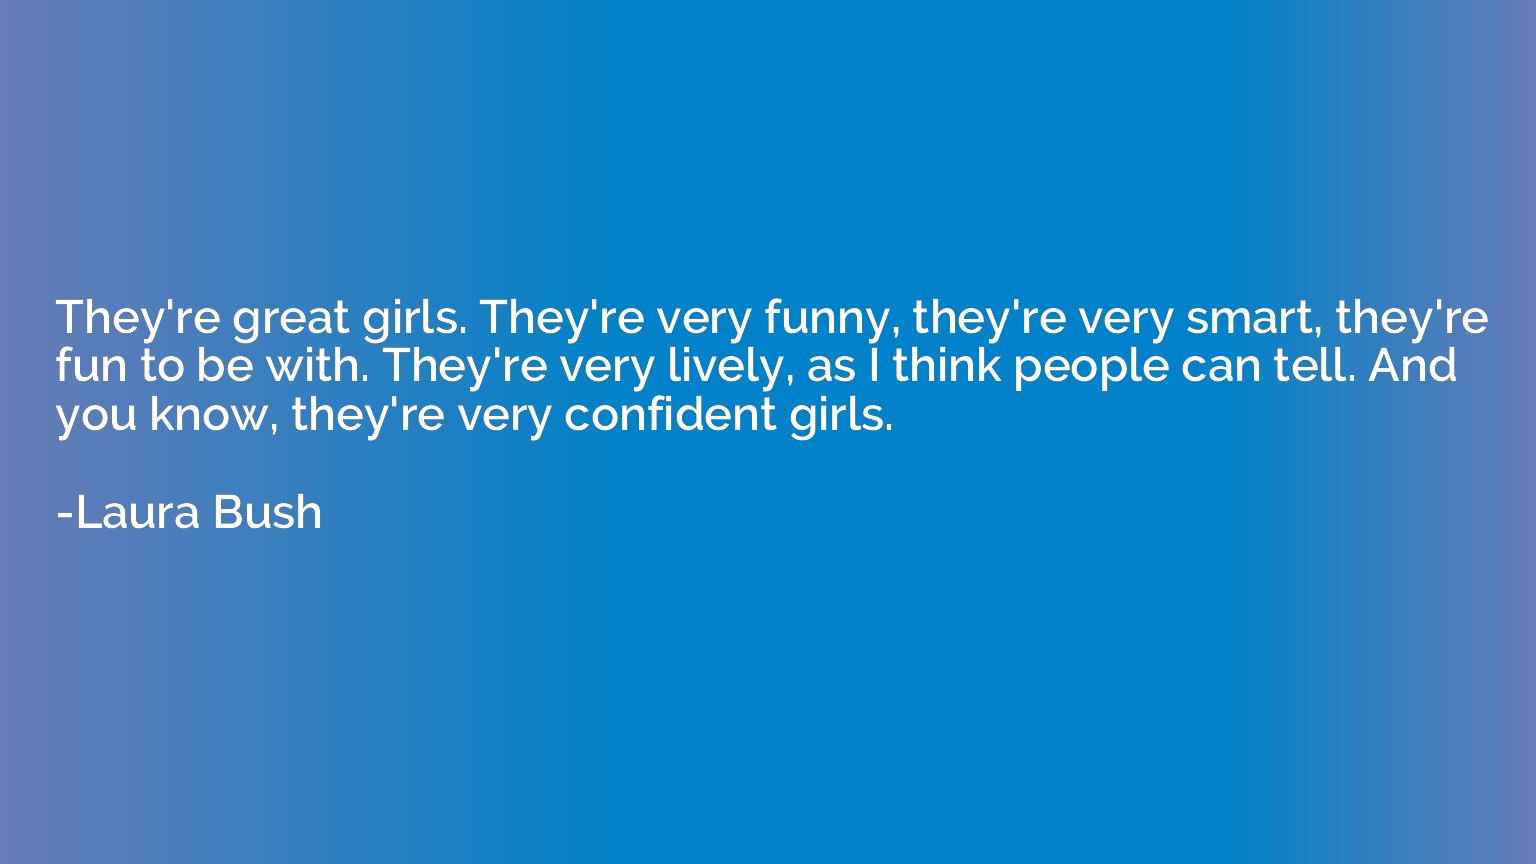 They're great girls. They're very funny, they're very smart,